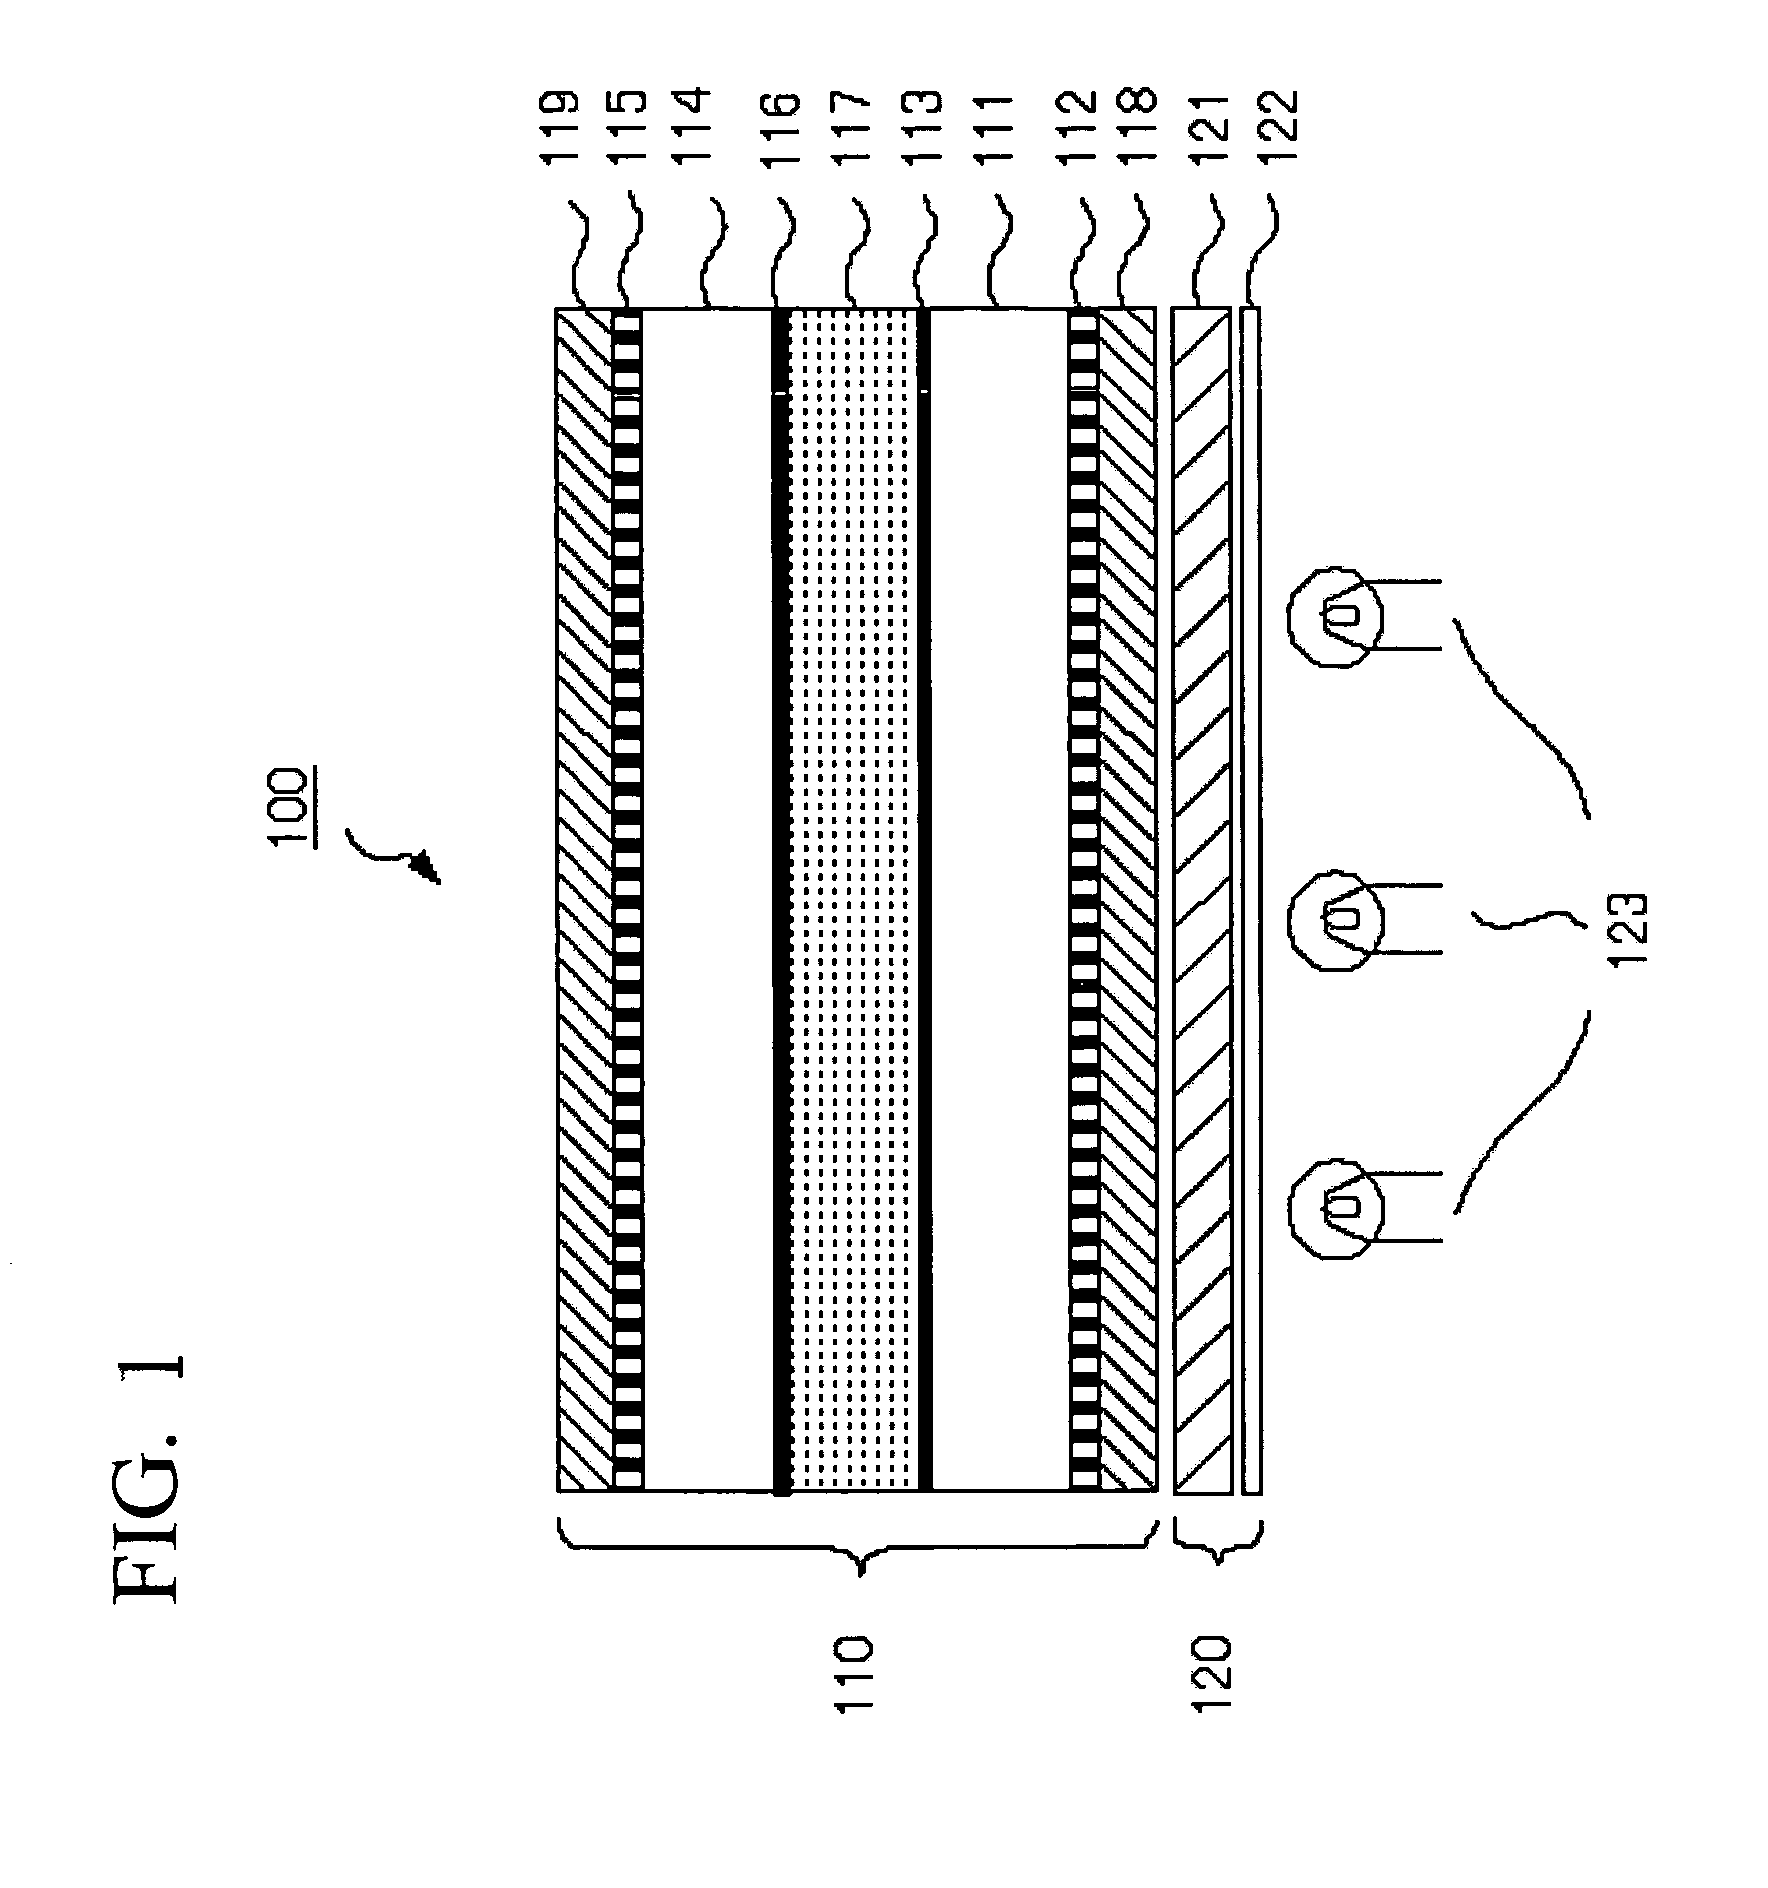 Liquid crystal display cell, display cell, glass substrate for display device and manufacturing method for liquid crystal display cell